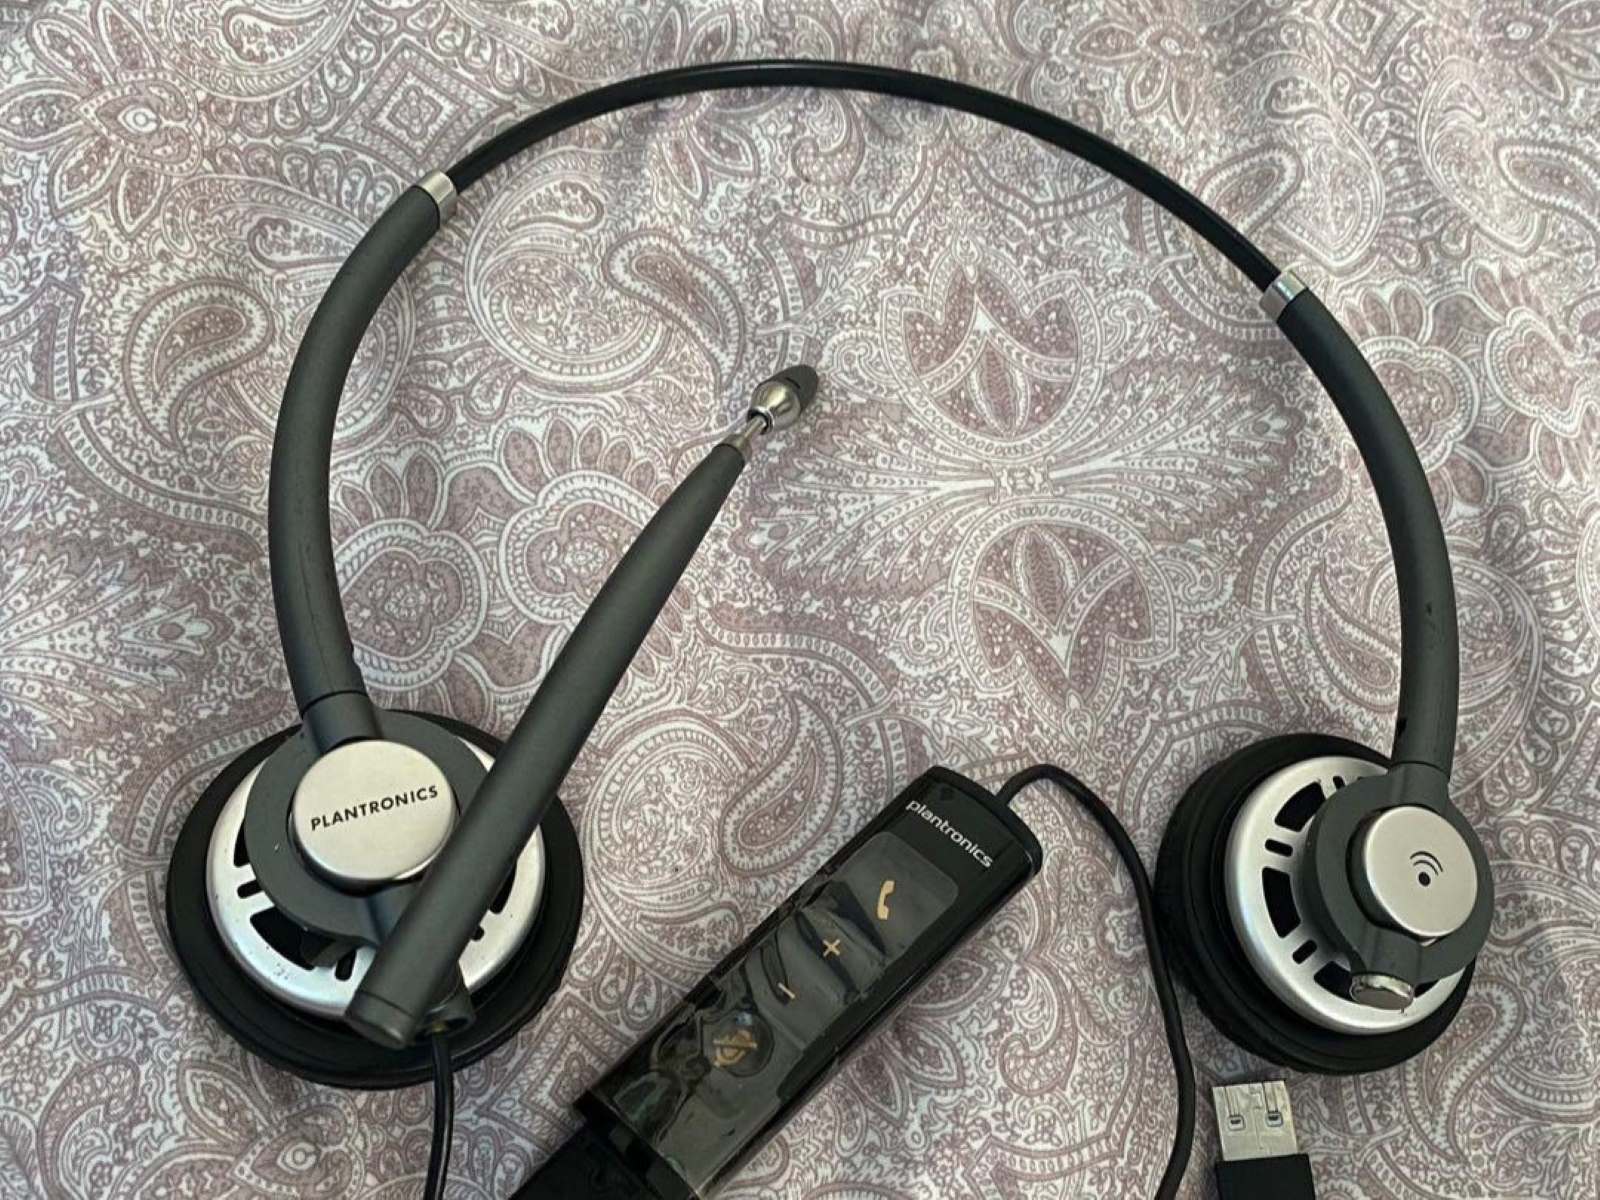 plantronics-headset-beeping-woes-troubleshooting-and-fixes